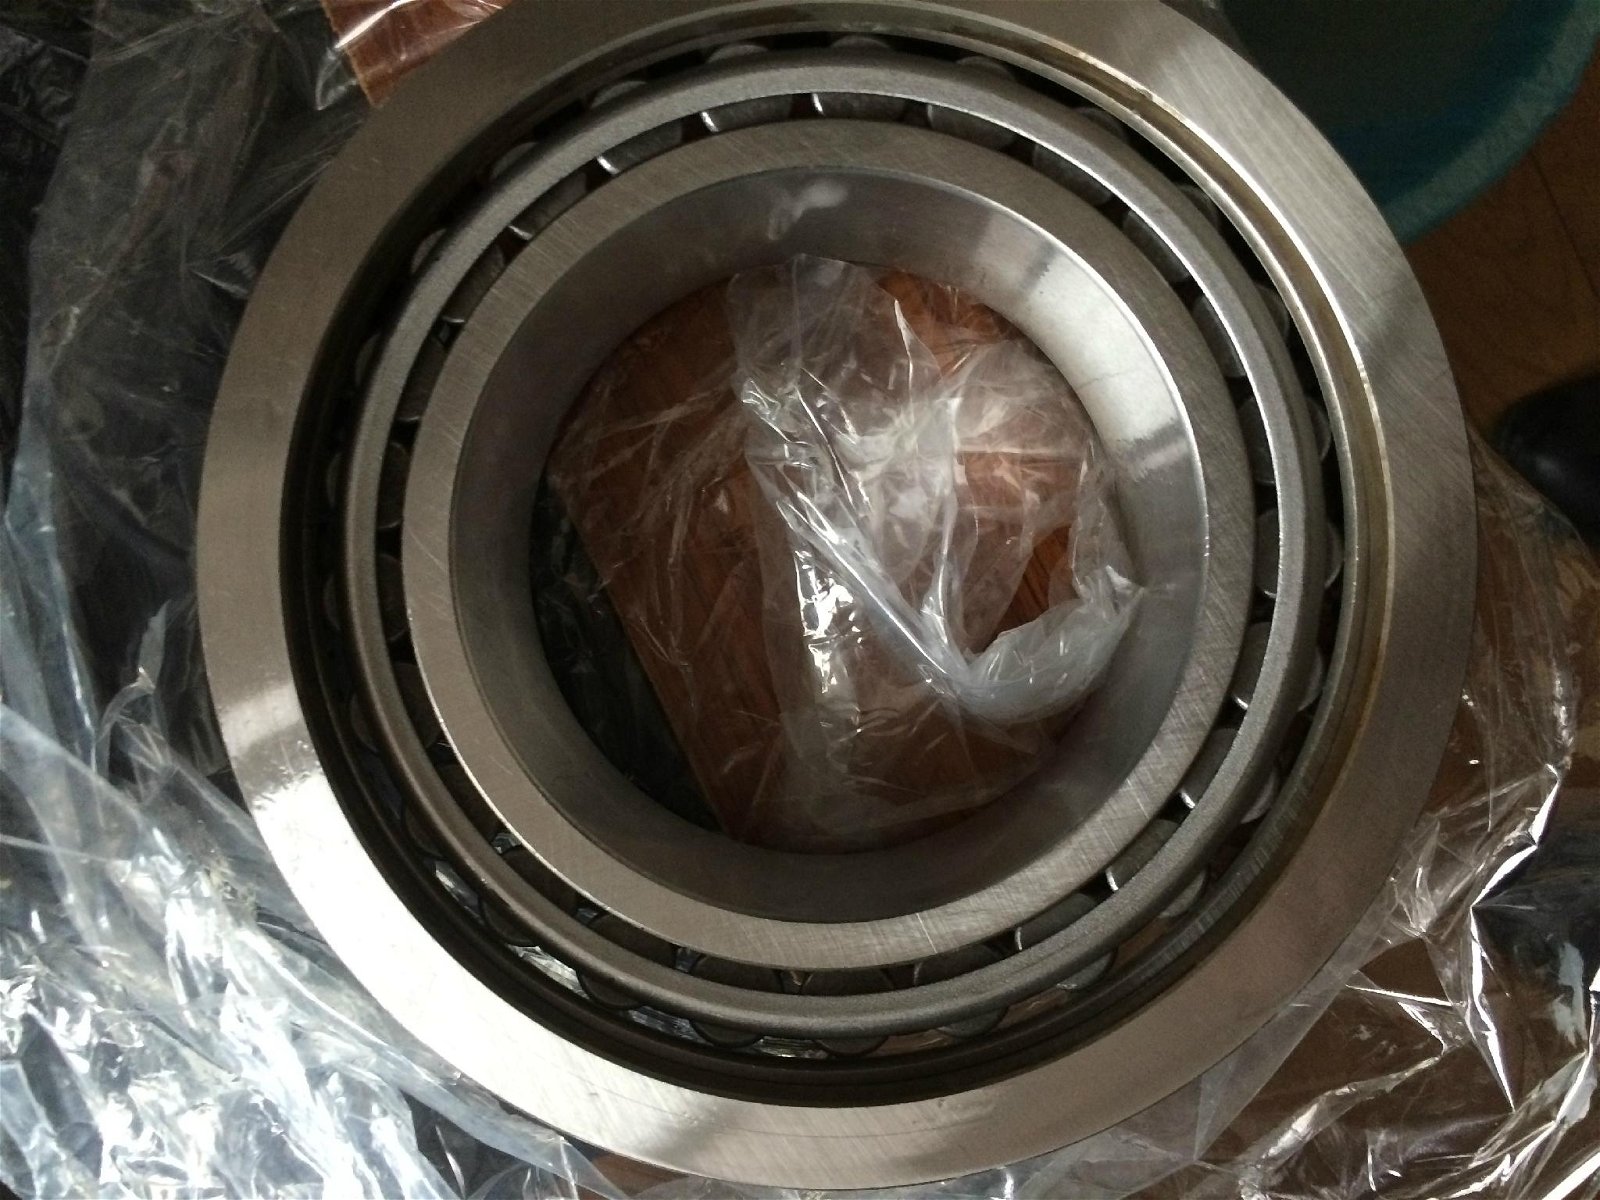 tapered roller bearing 2